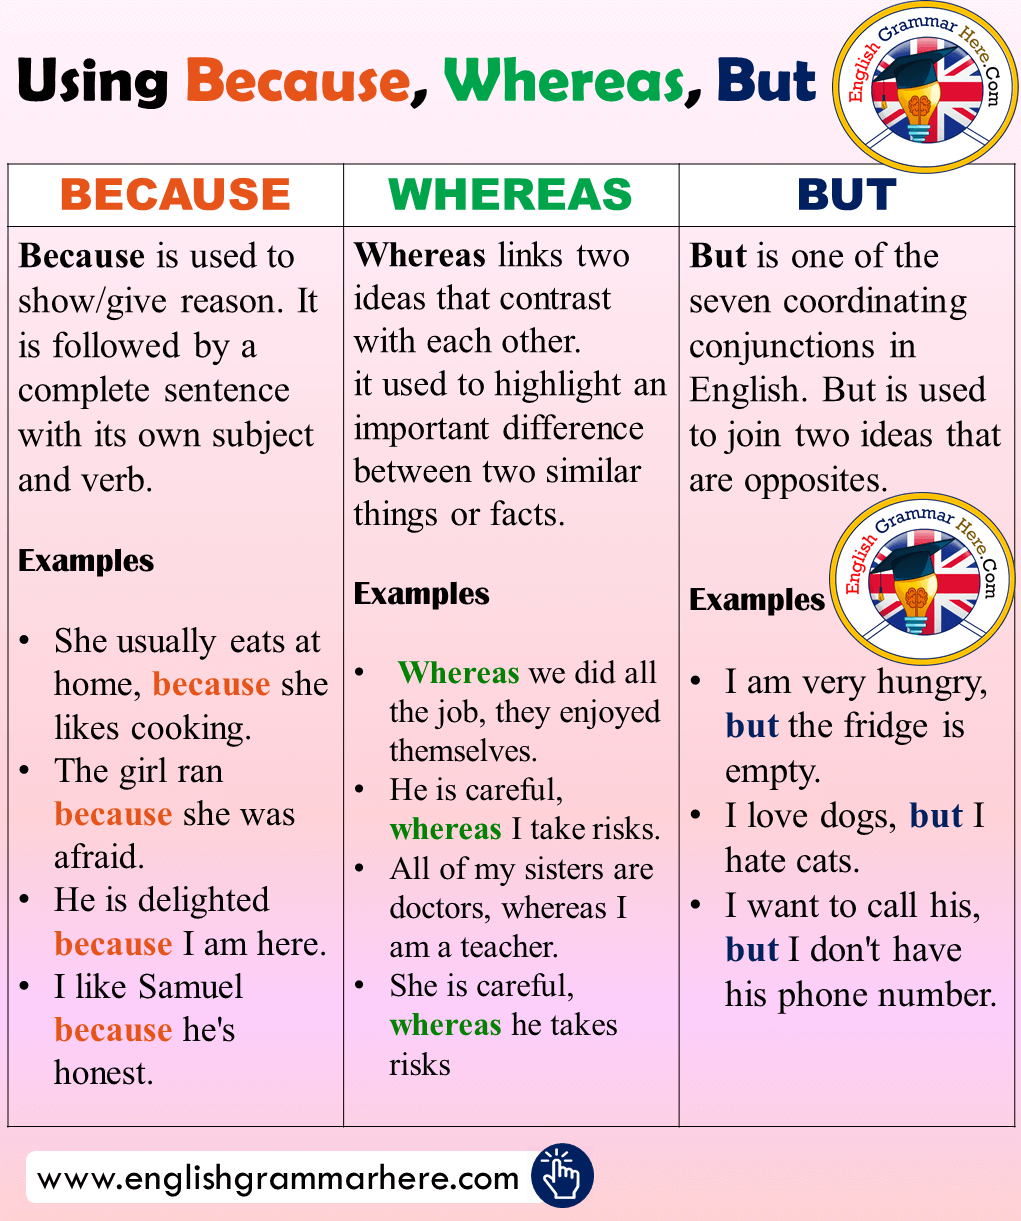 Using Because, Whereas, But in English, Conjunctions and Example Sentences